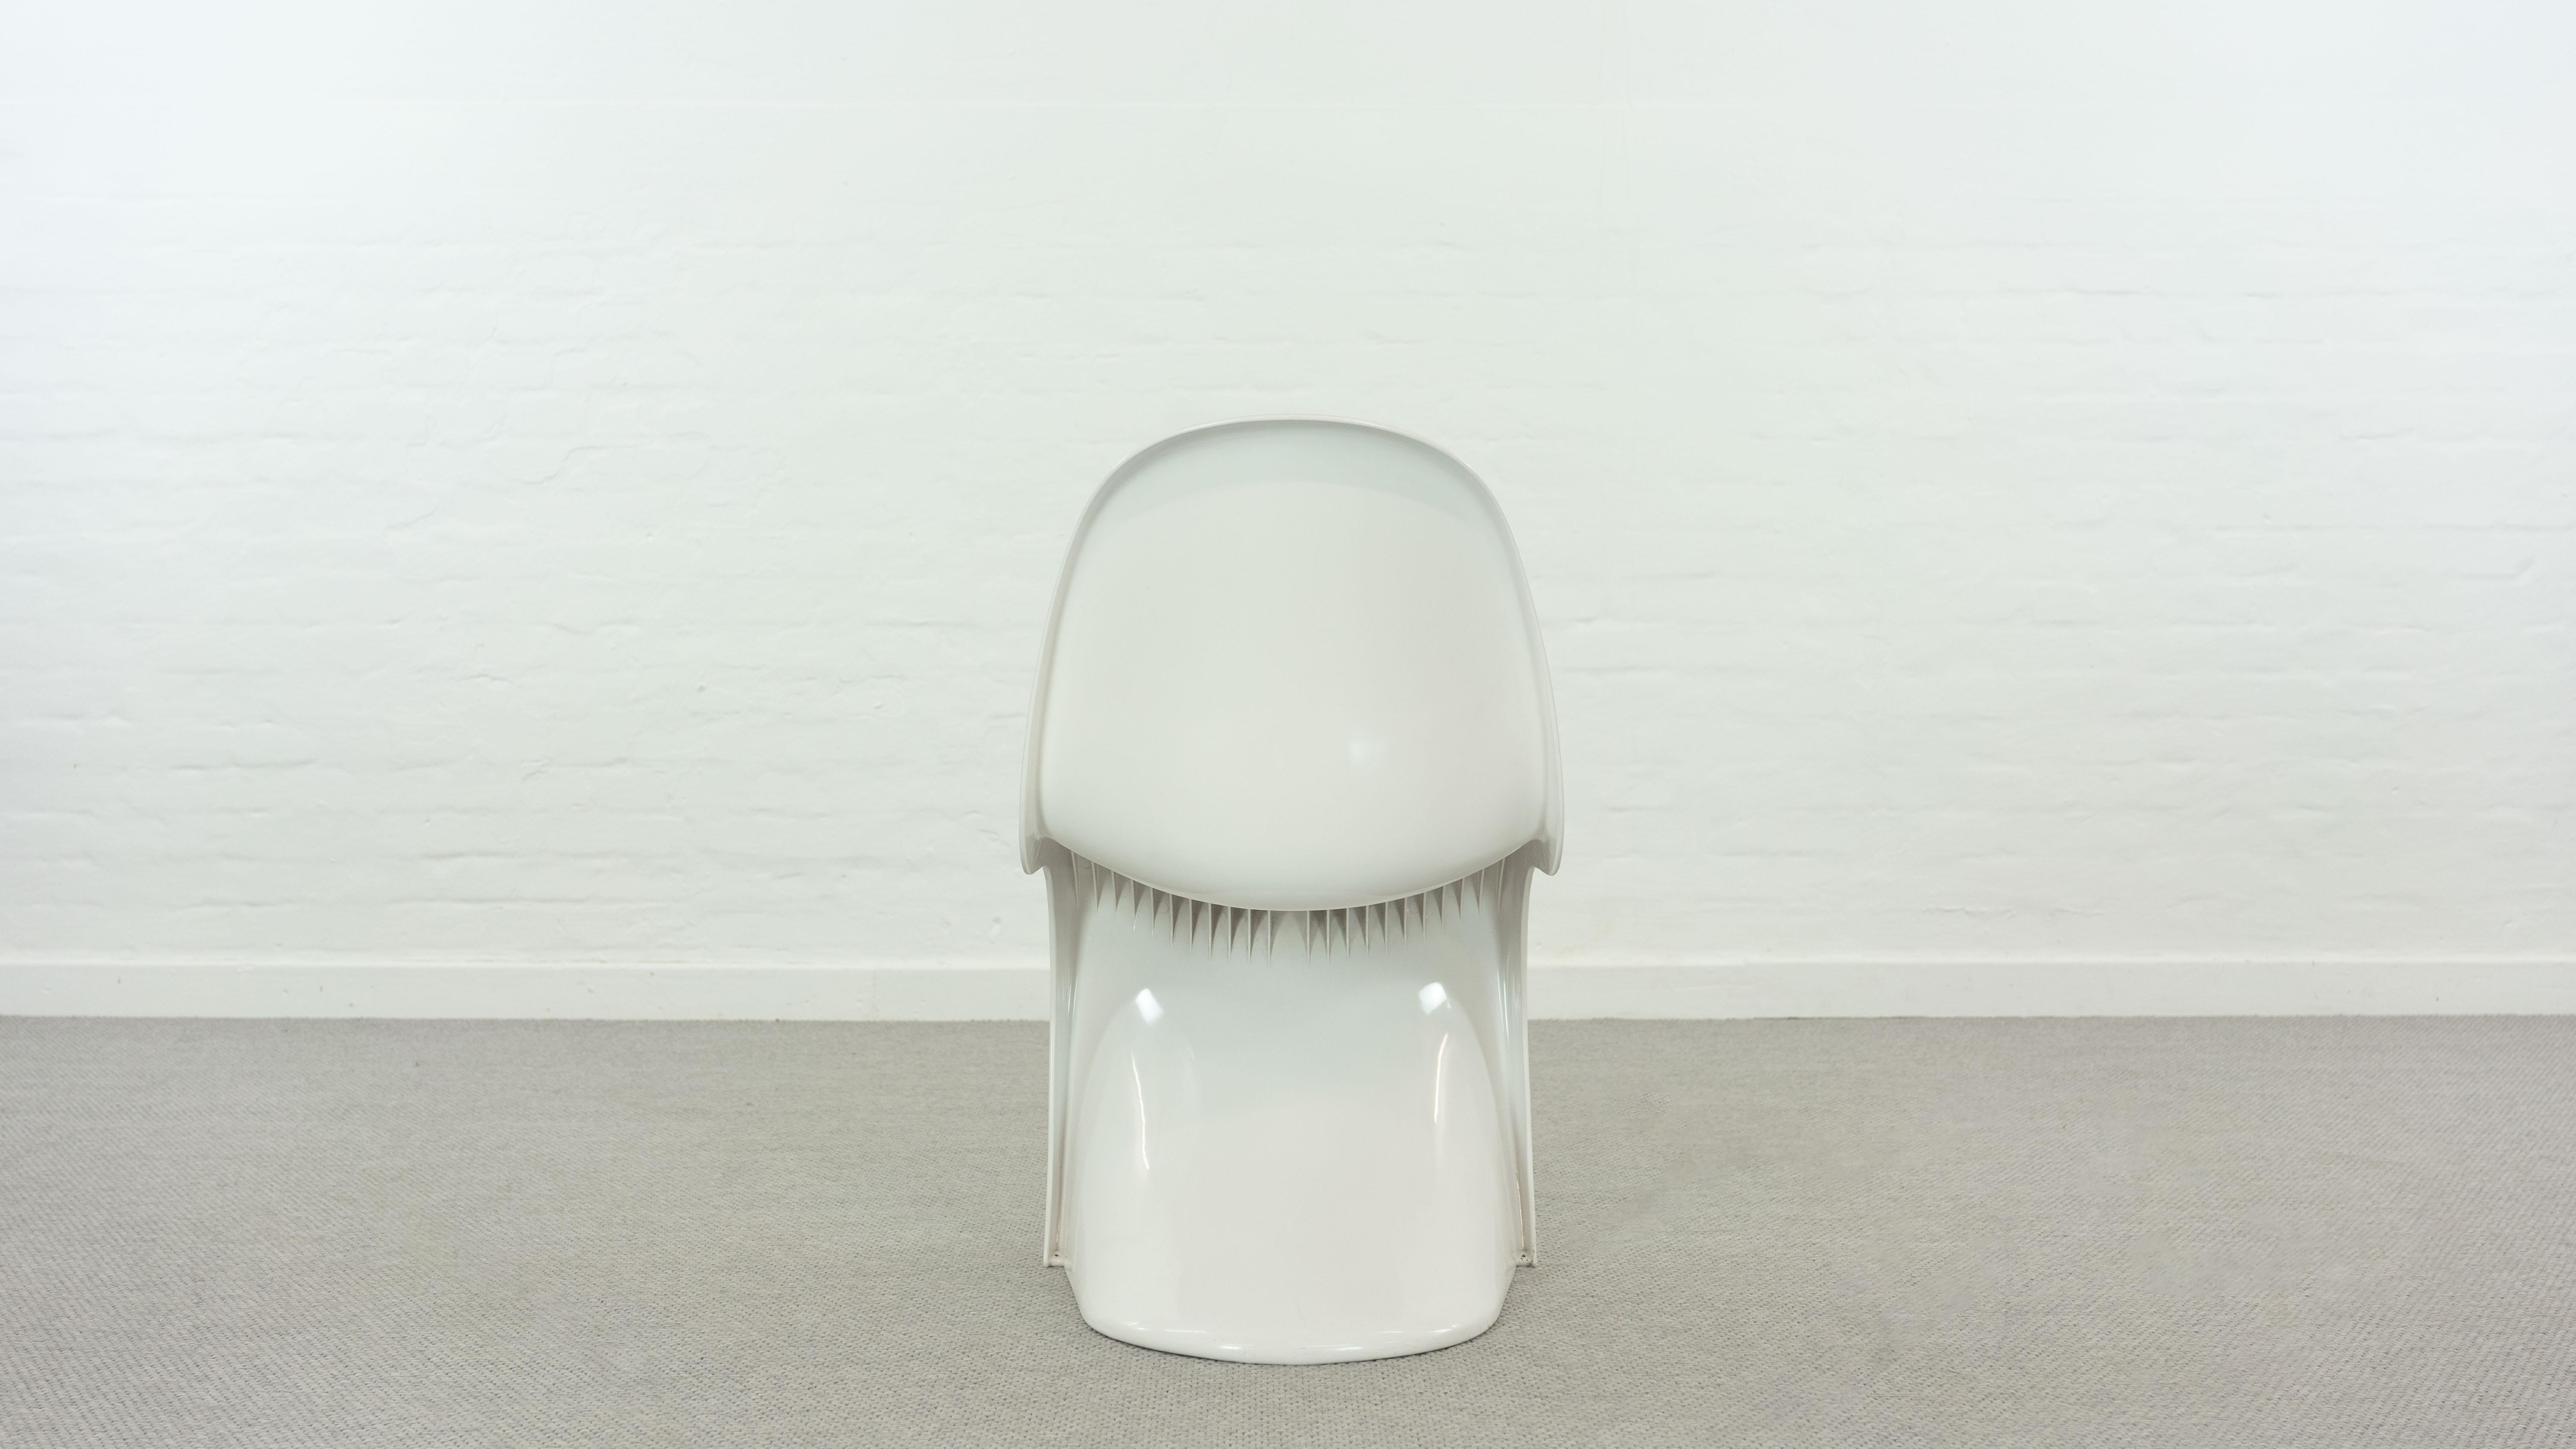 Panton Chair by Verner Panton for Herman Miller / Fehlbaum, in white 1976 In Good Condition For Sale In Halle, DE